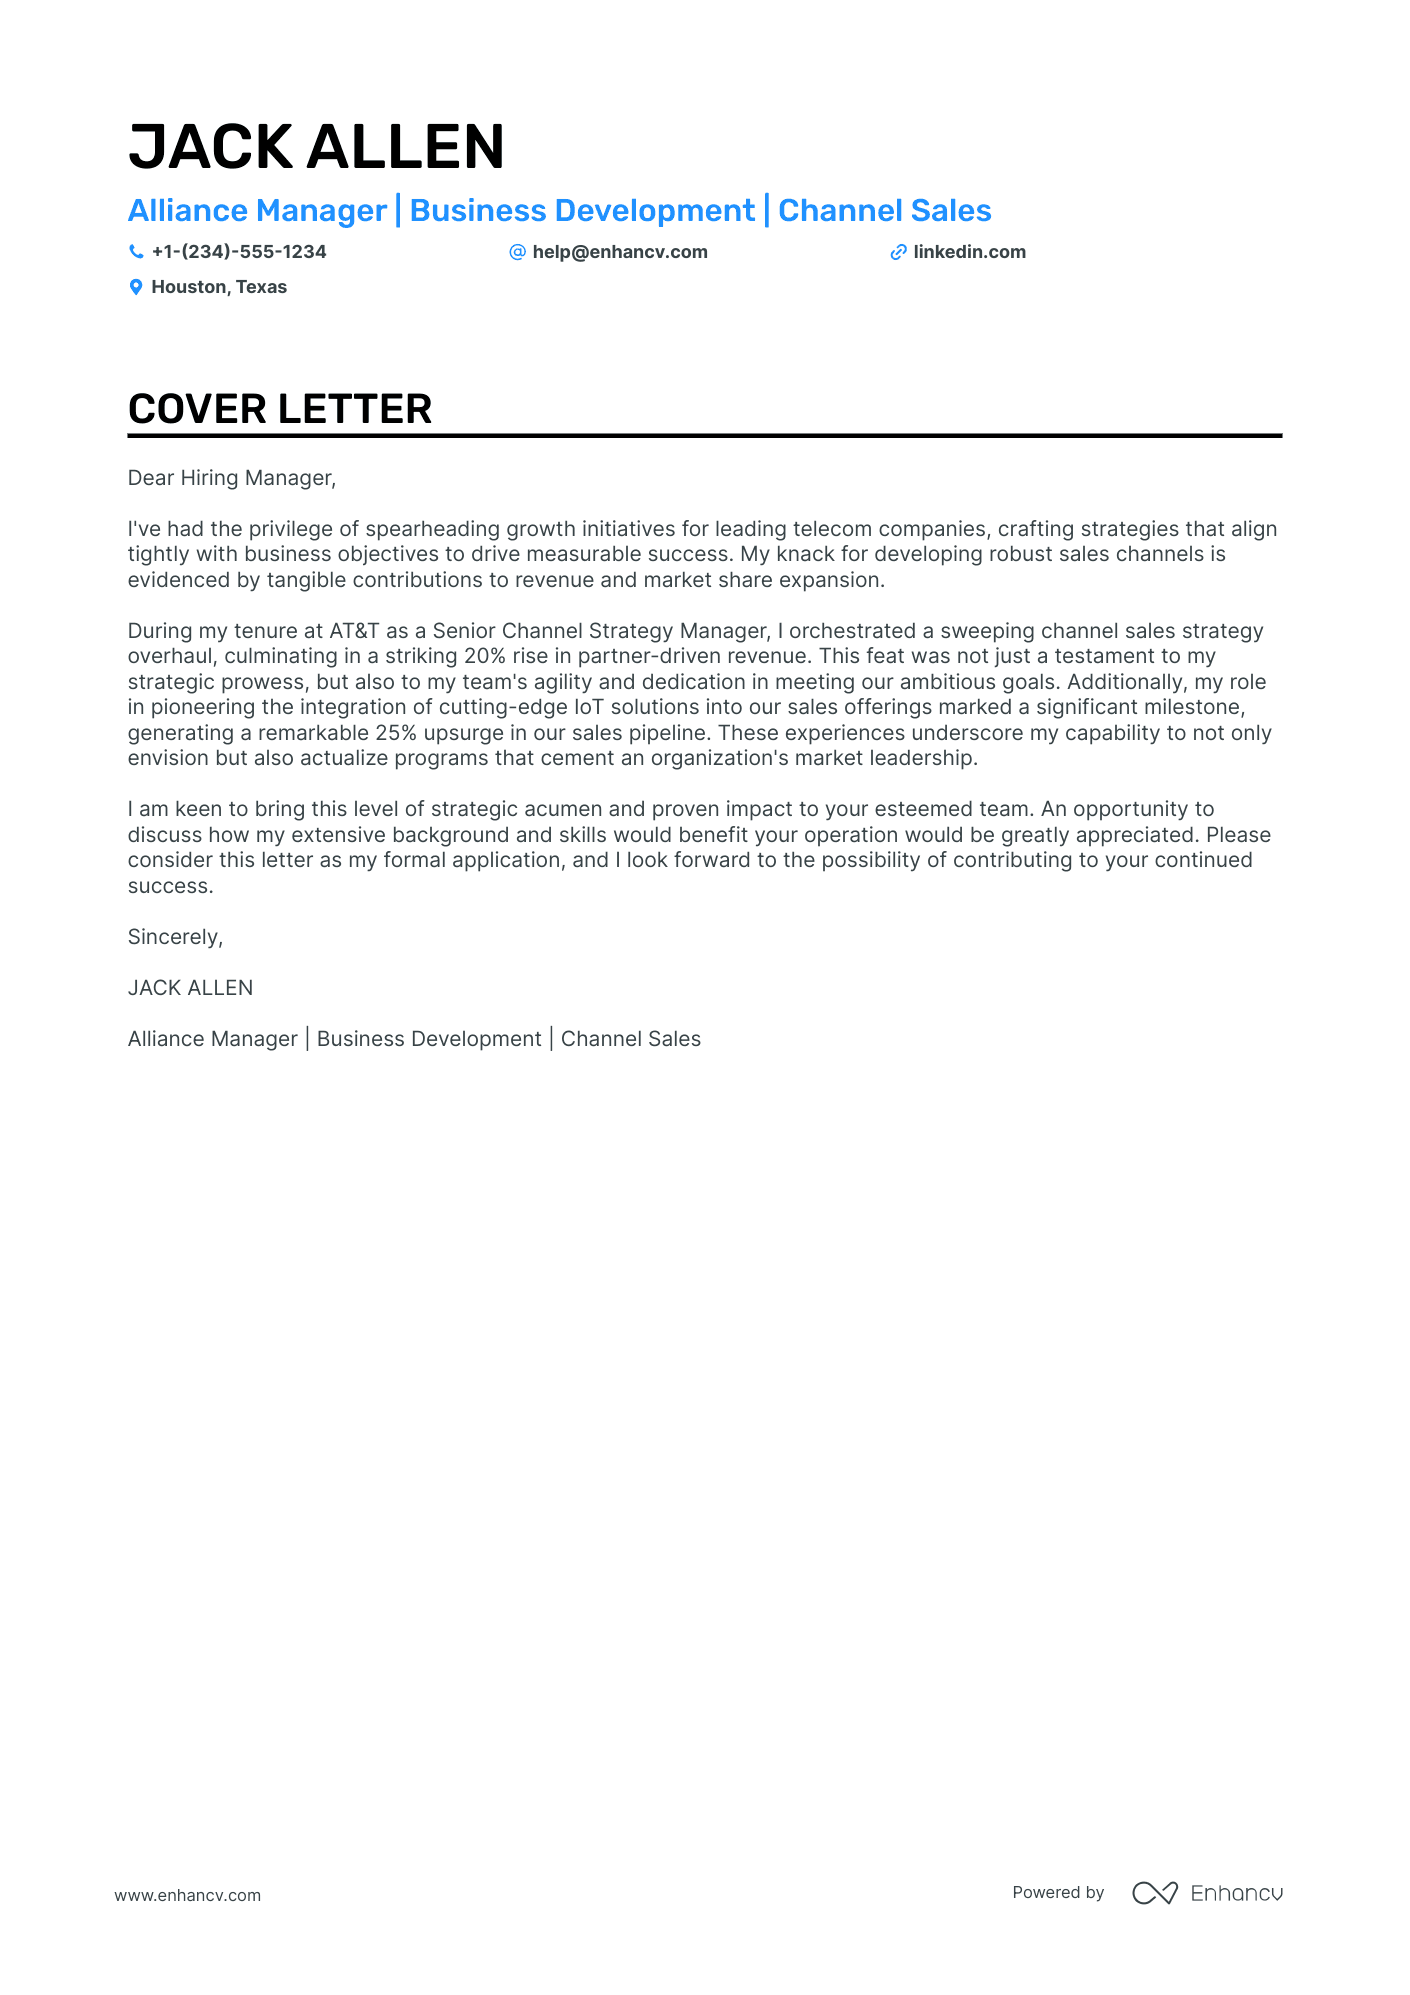 Alliance Manager cover letter